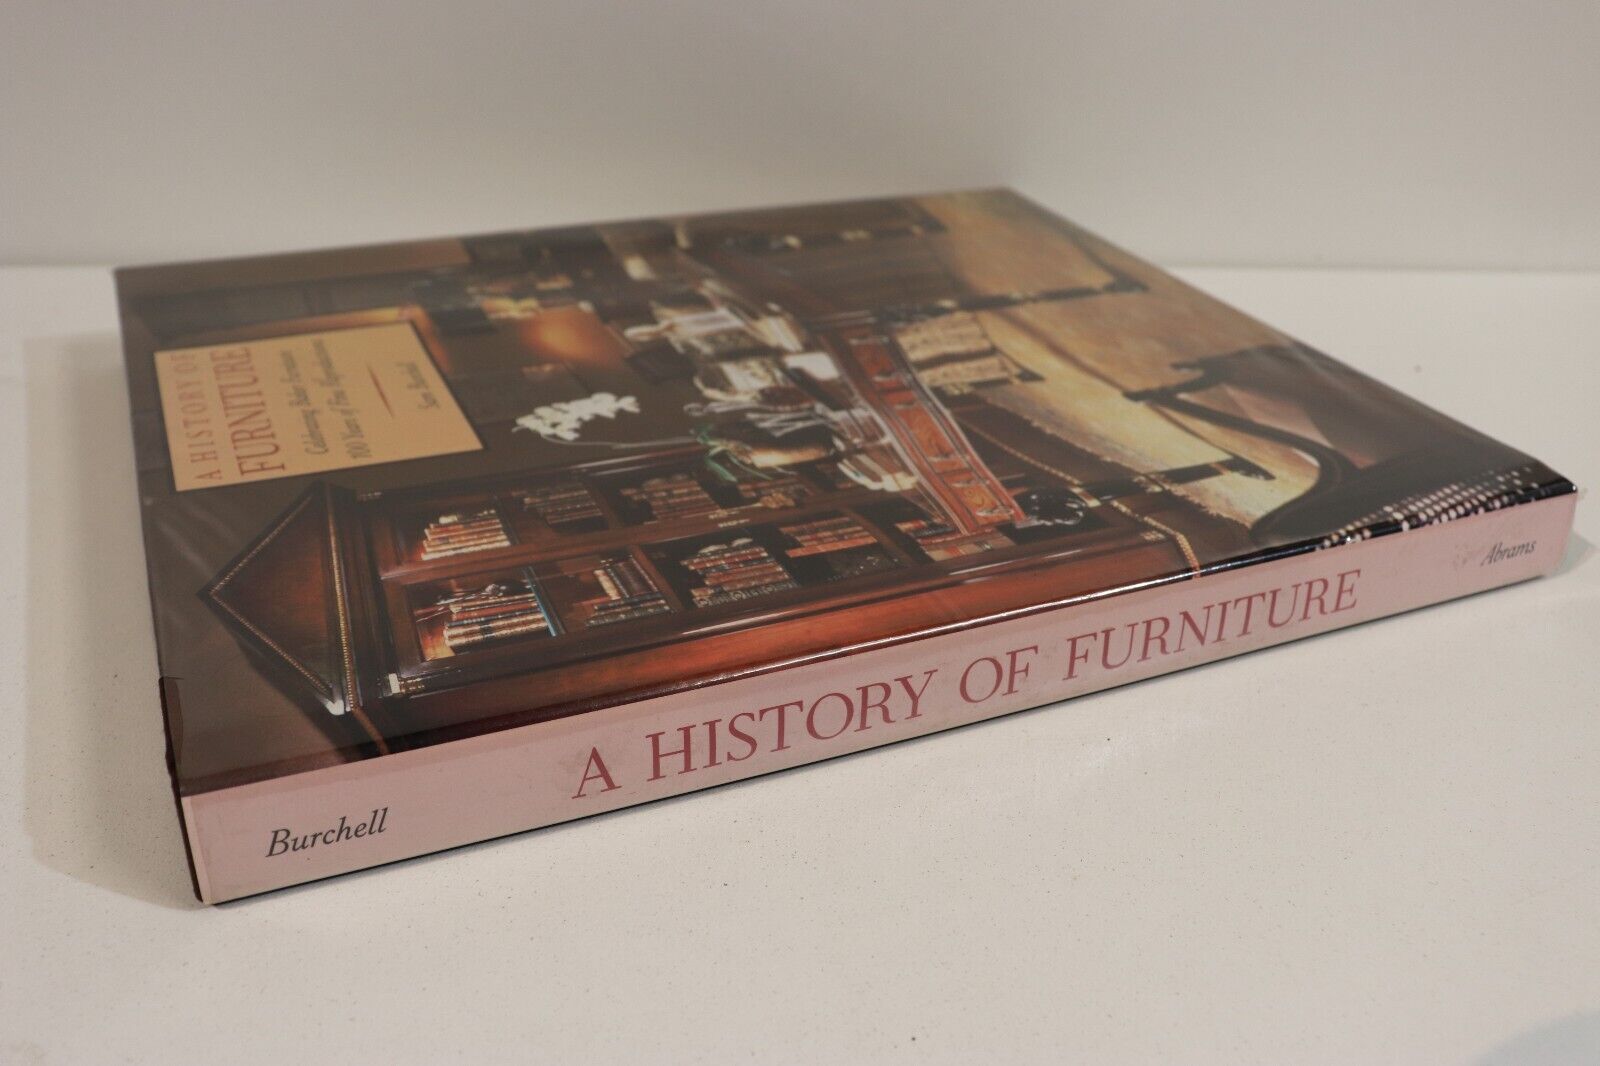 A History Of Furniture by Sam Burchell - 1991 - Baker Furniture Reference Book - 0